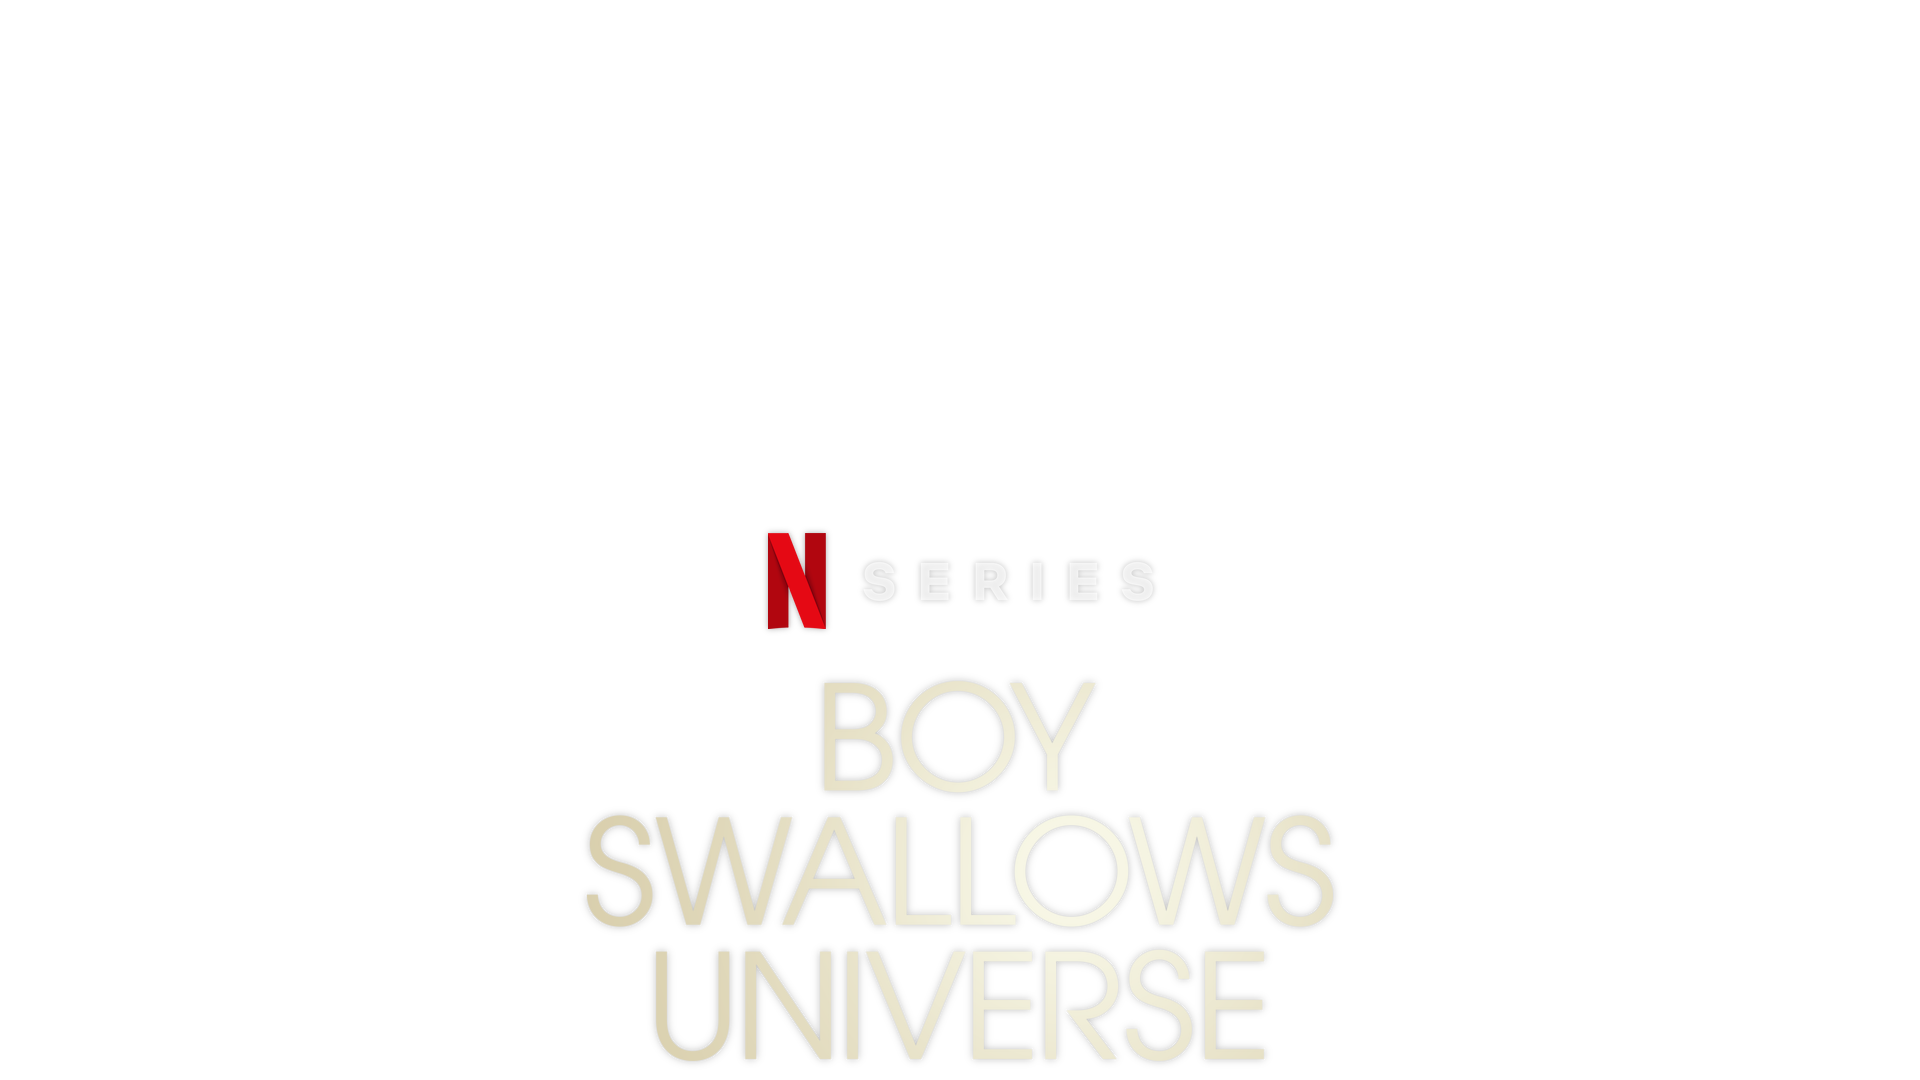 Boy Swallows Universe: Cast, Trailer, and Plot of the Series Based on a  Book - Netflix Tudum